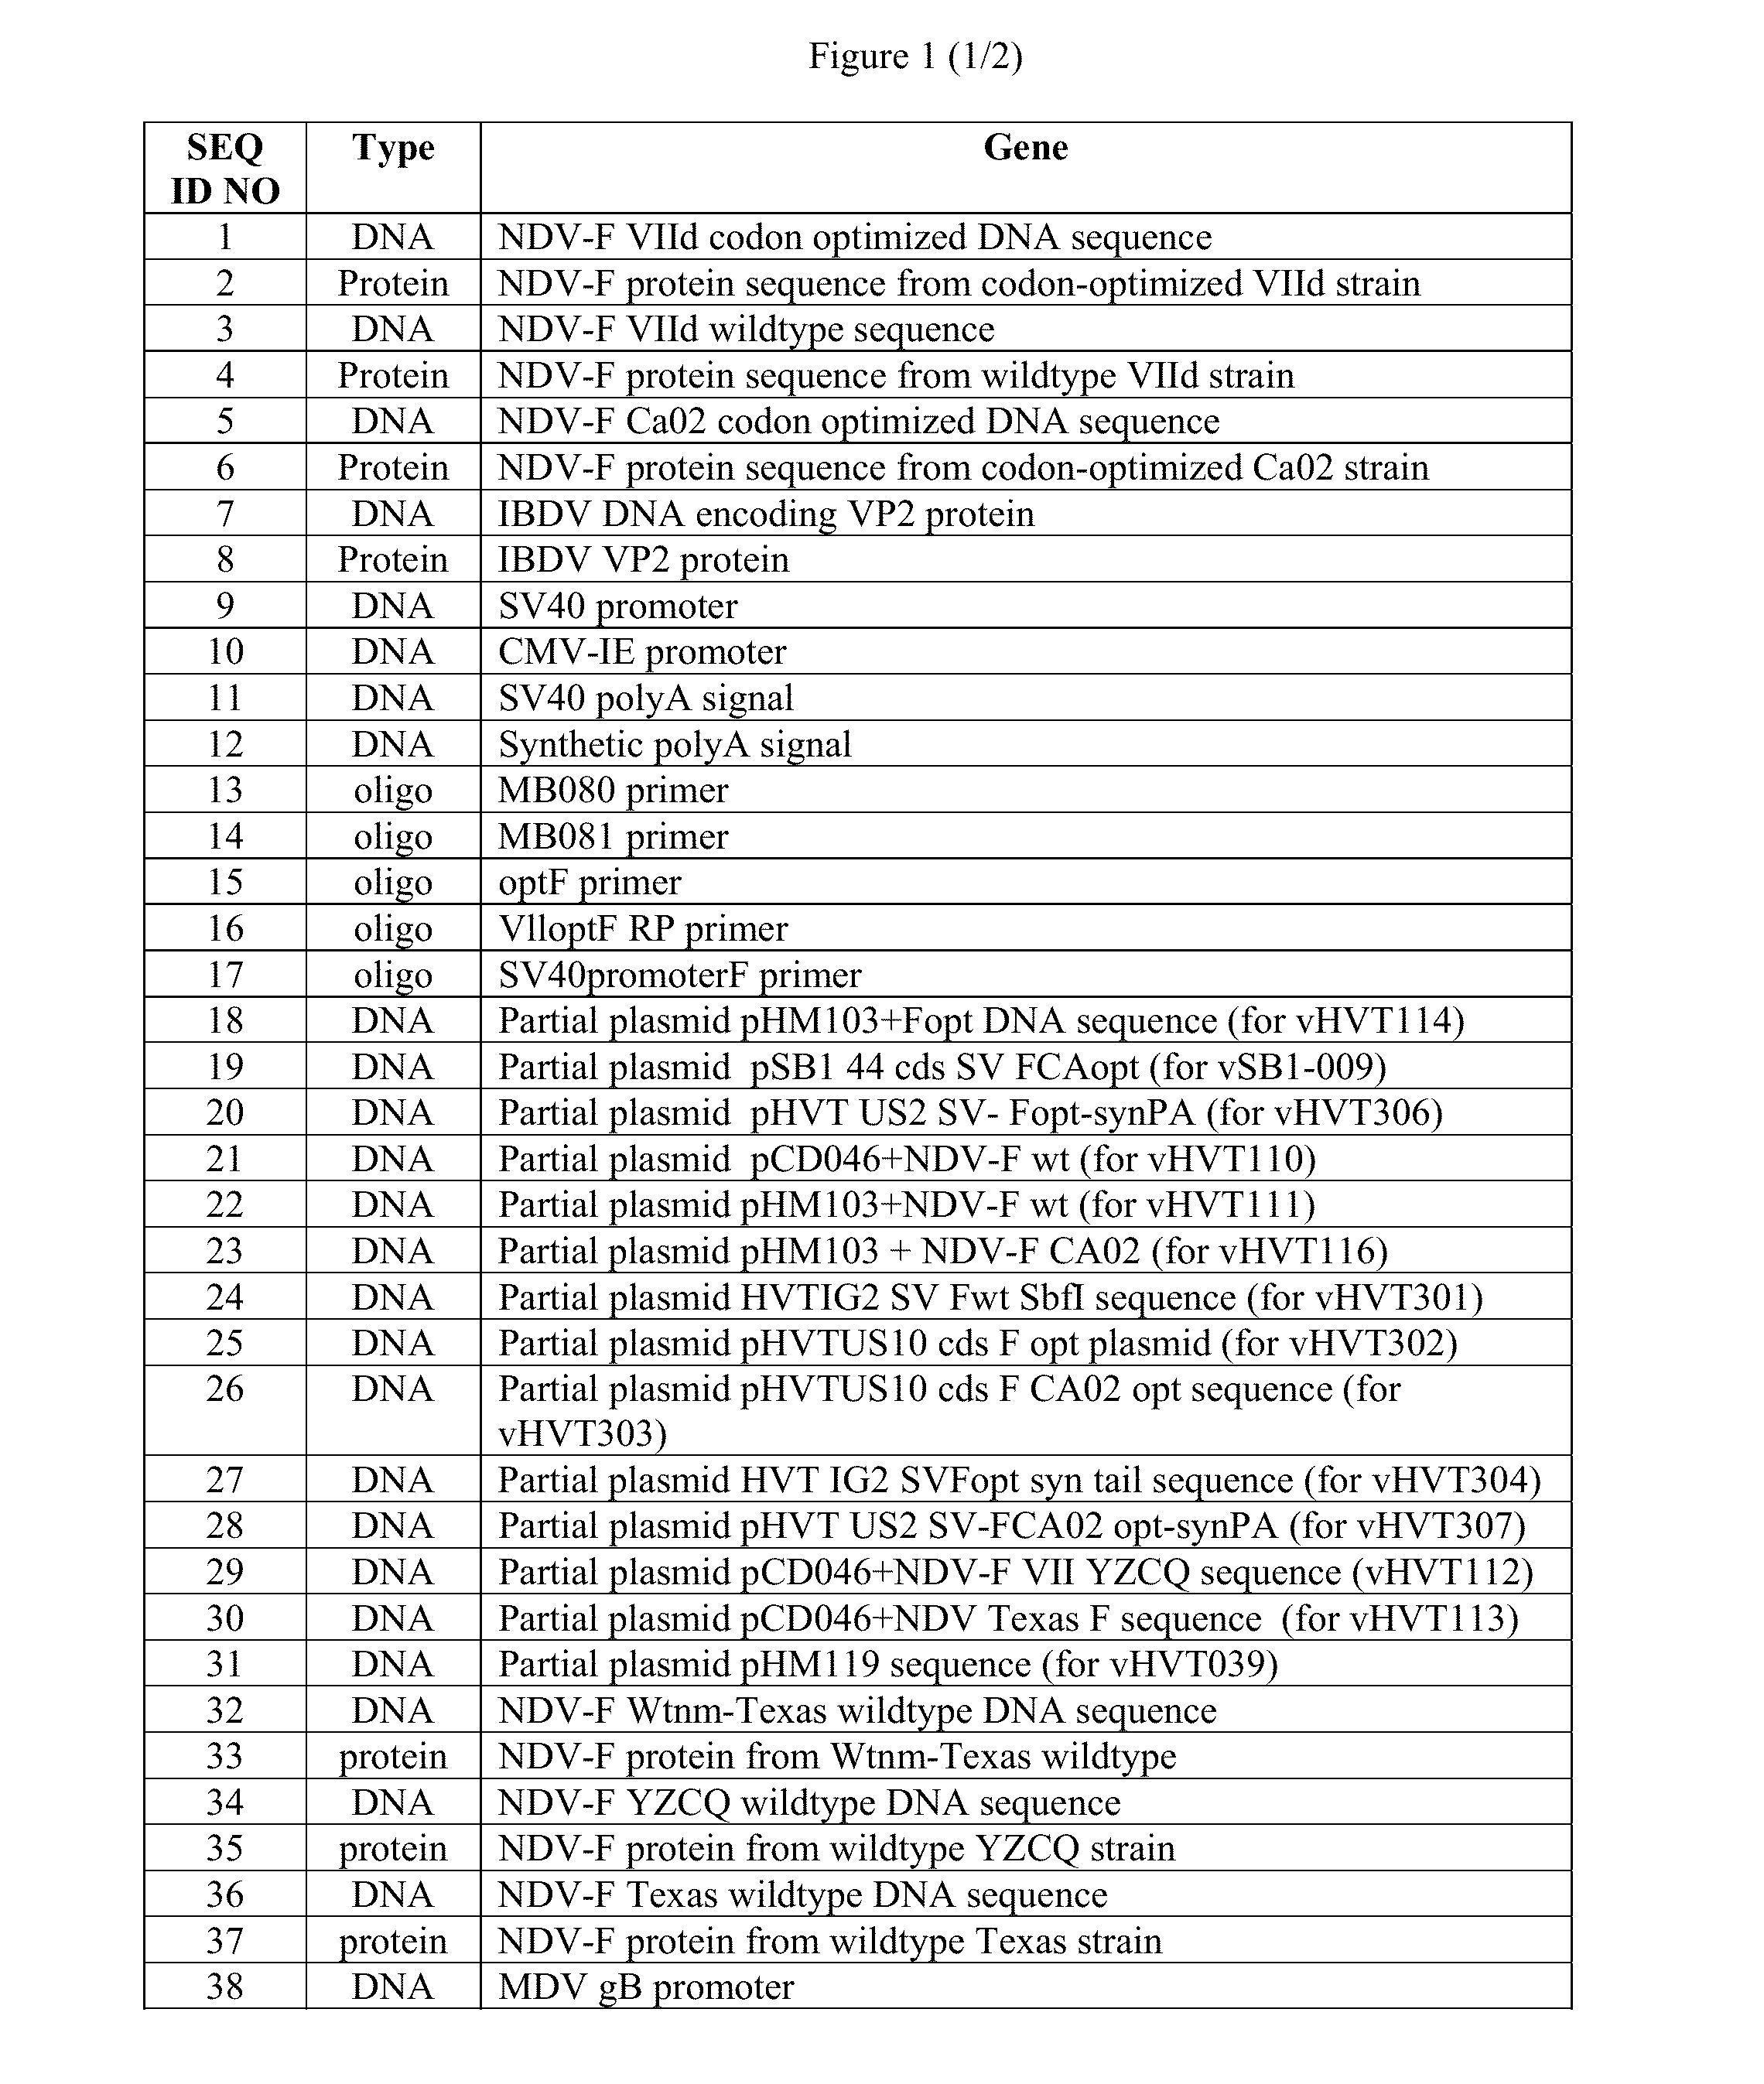 Recombinant hvt vectors expressing antigens of avian pathogens and uses thereof